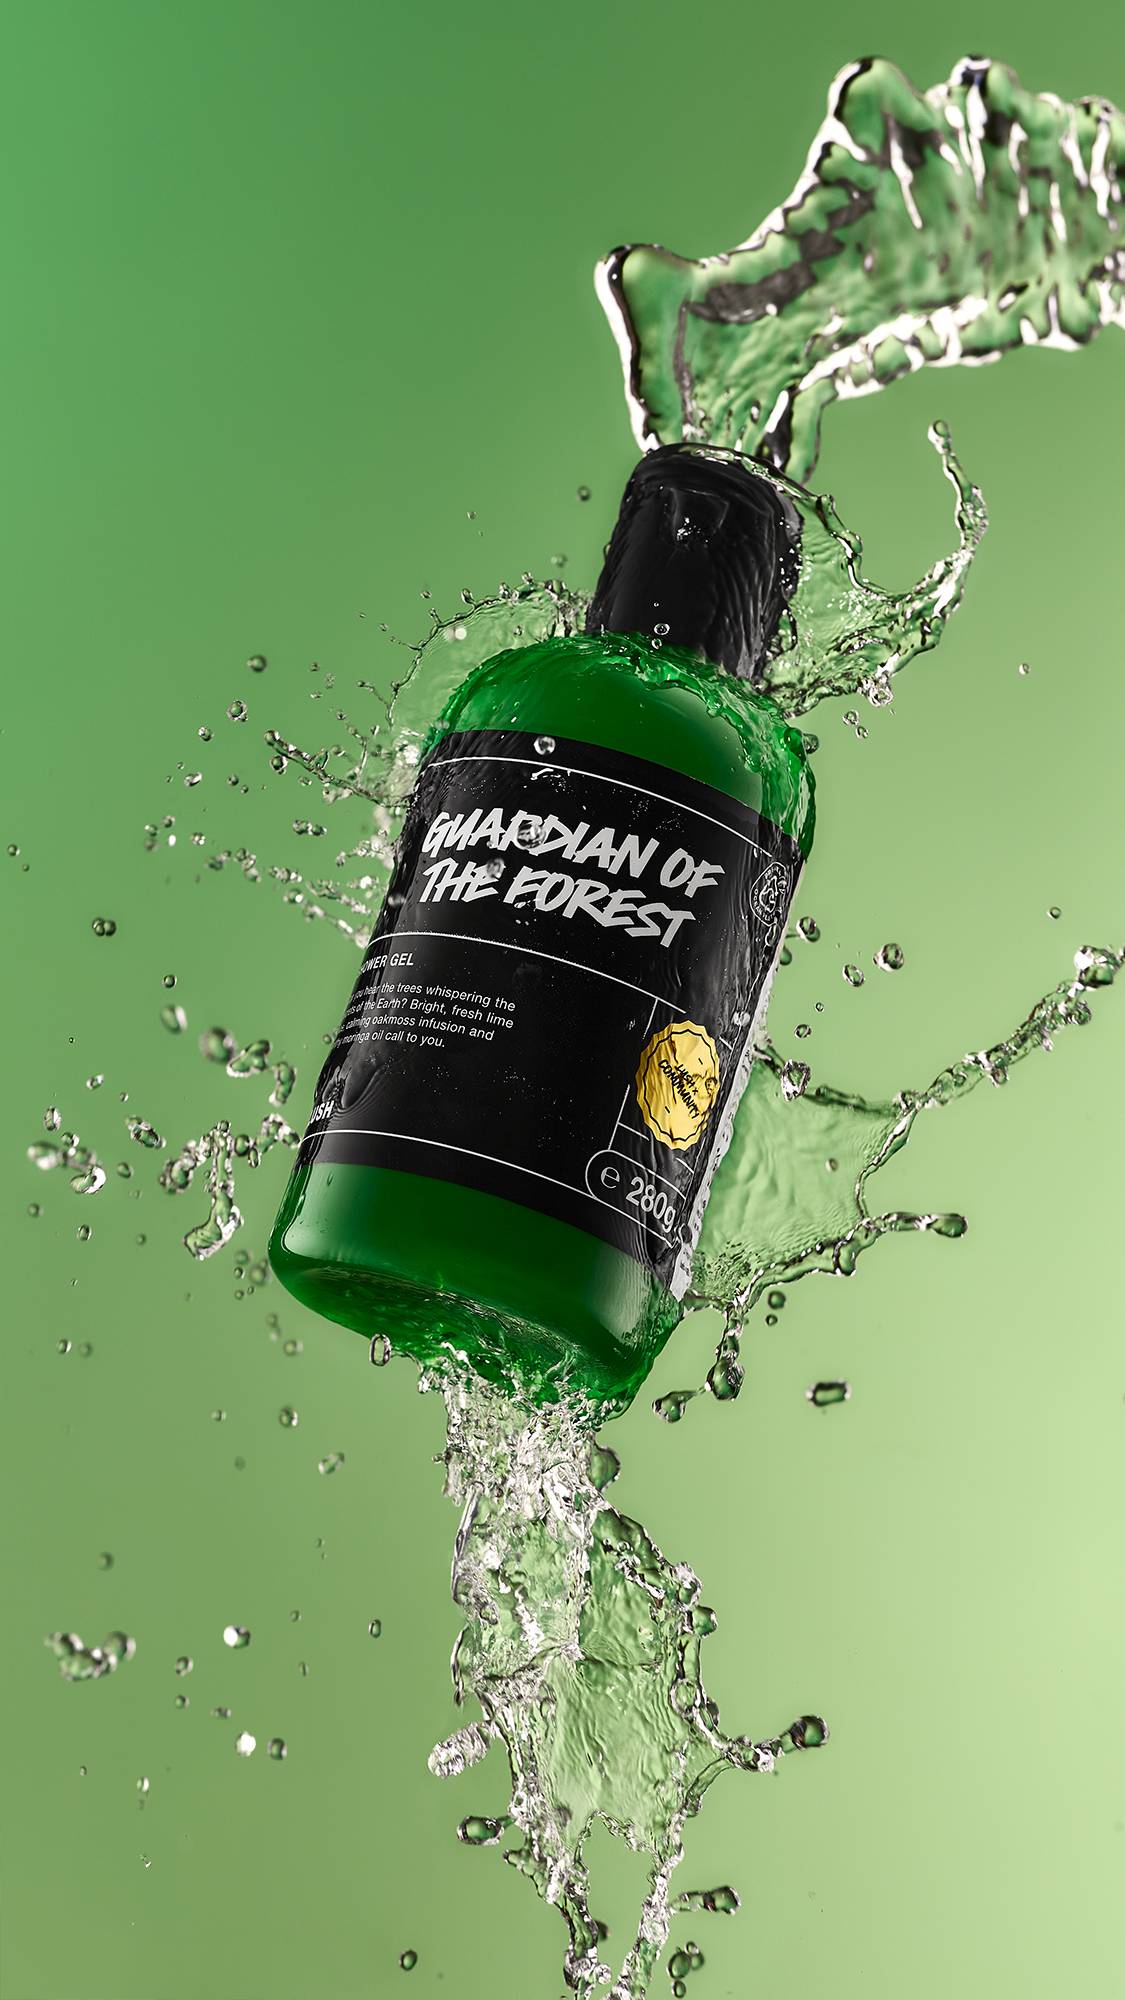 A high-definition action shot of the Guardian Of The Forest shower gel bottle mid-air being splashed by fresh water surrounded by droplets on a forest-green background.